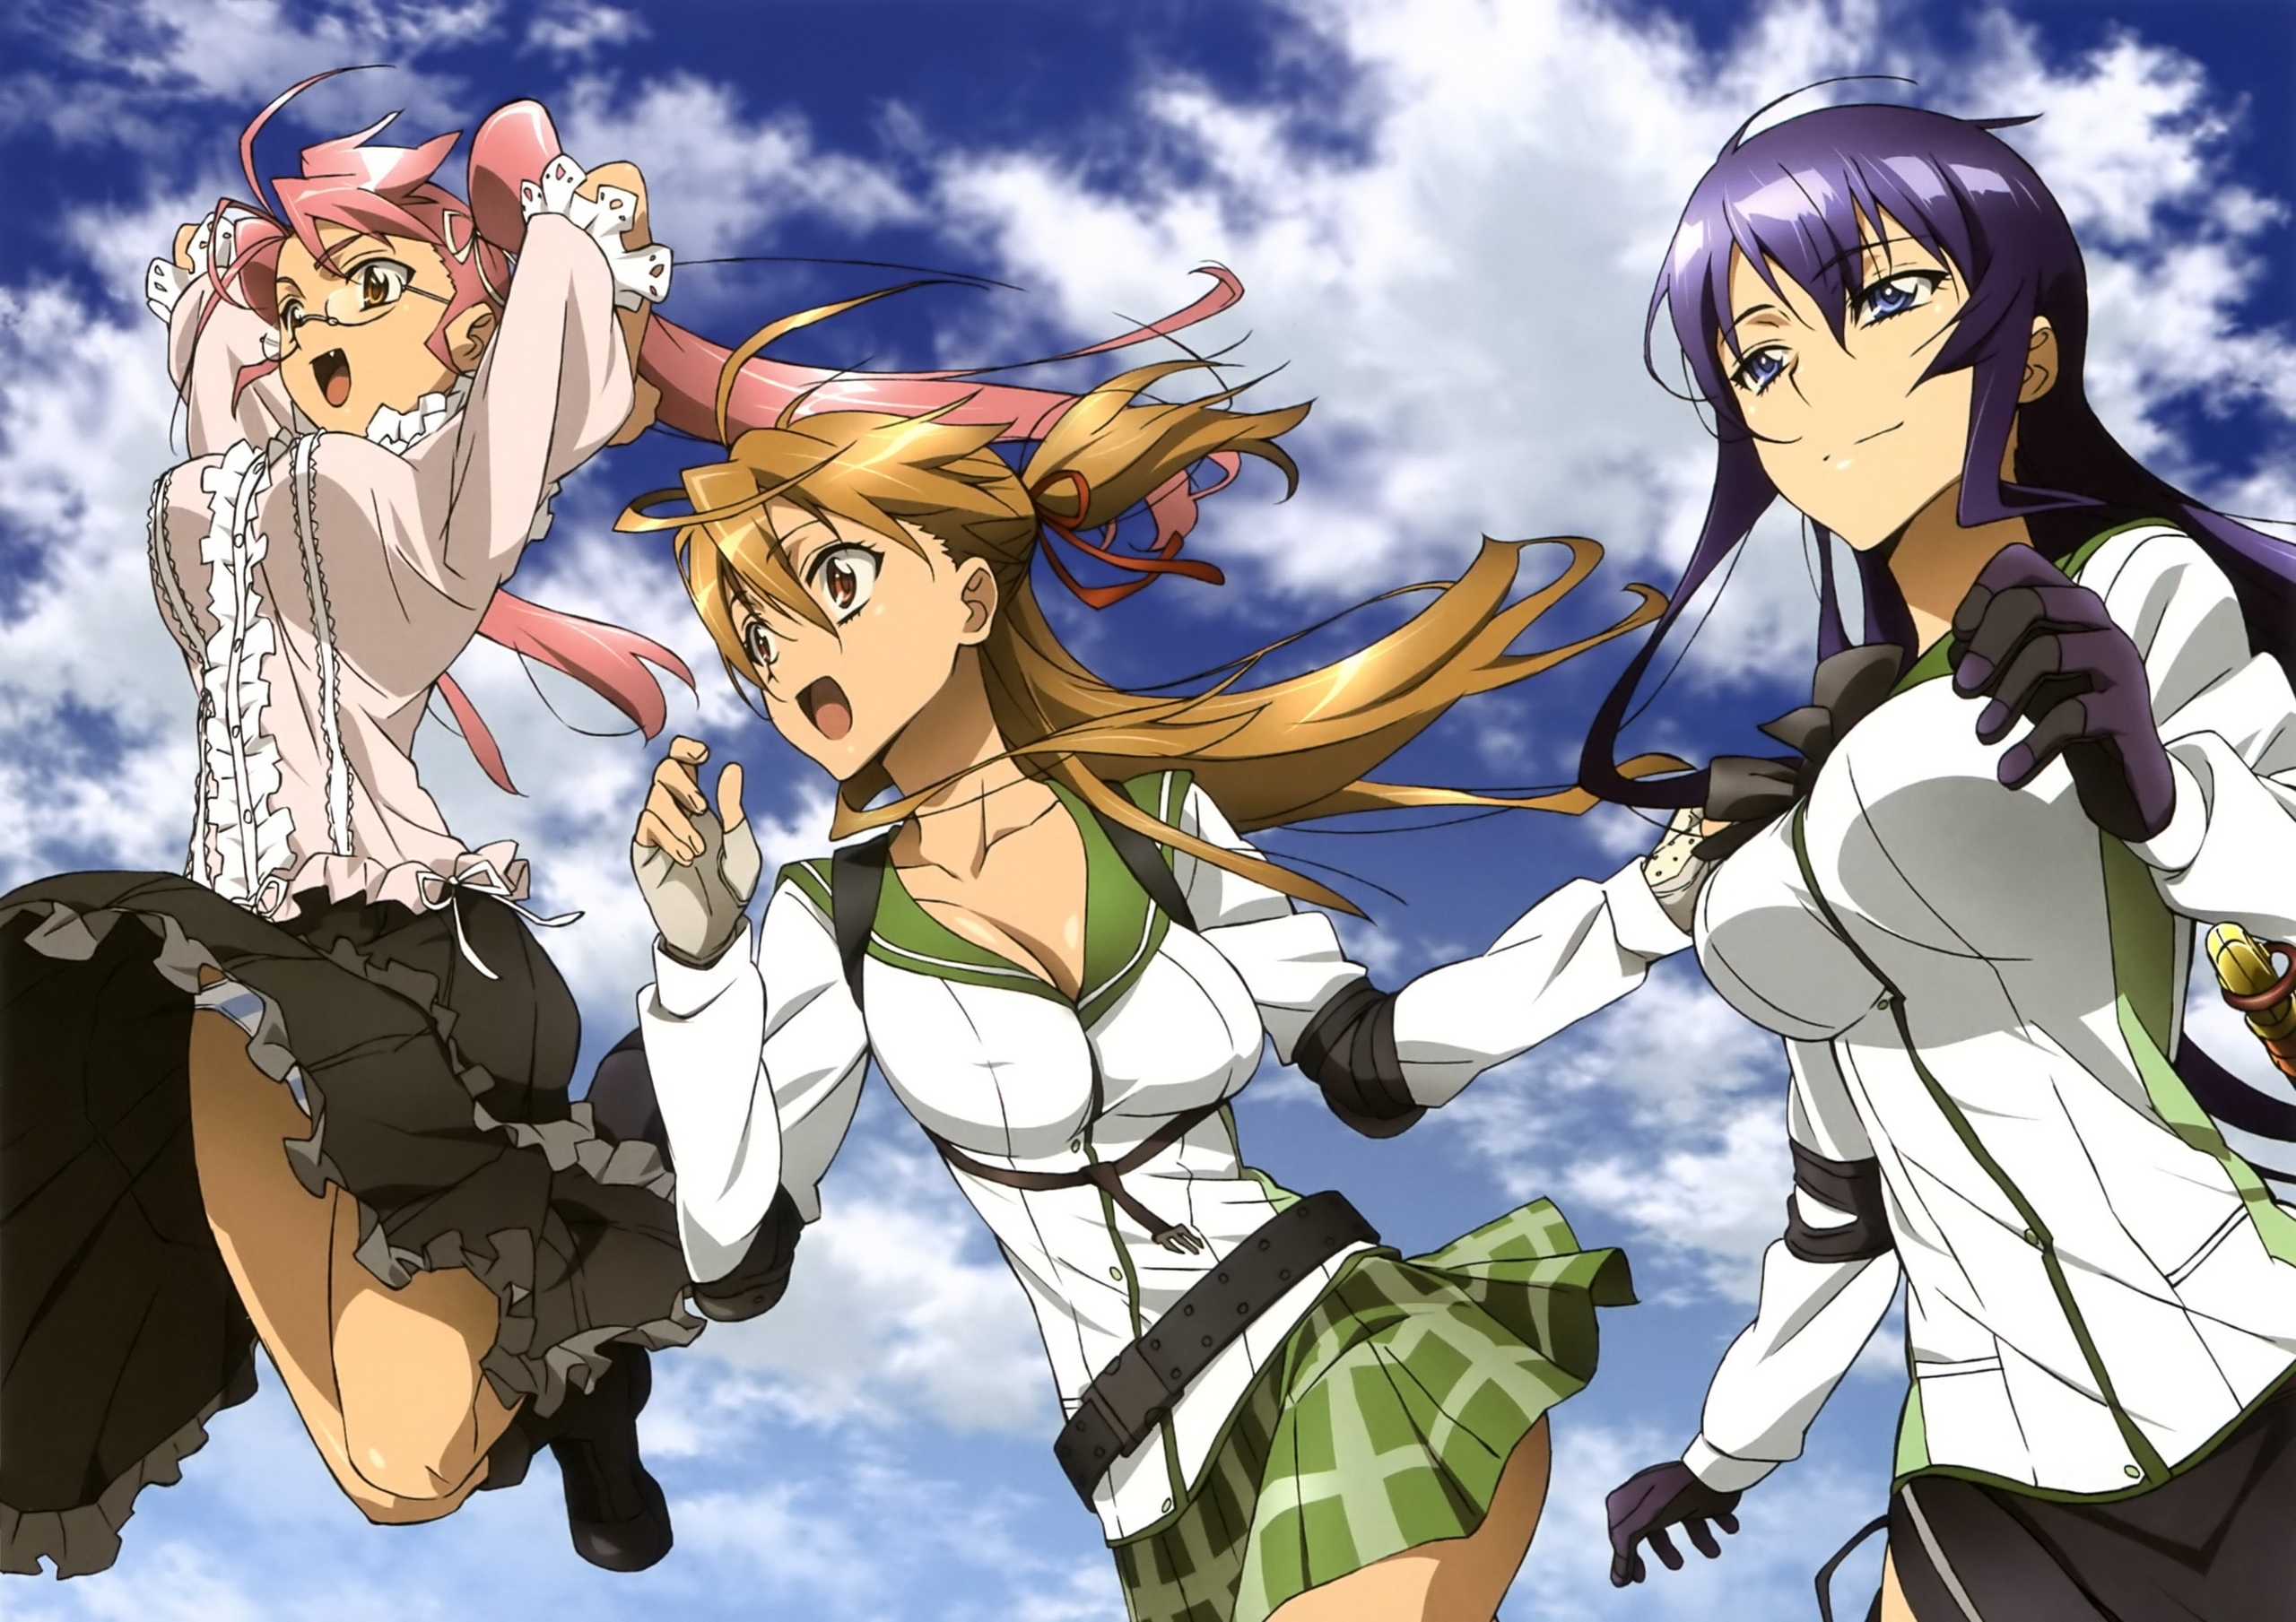 Highschool of the Dead poster